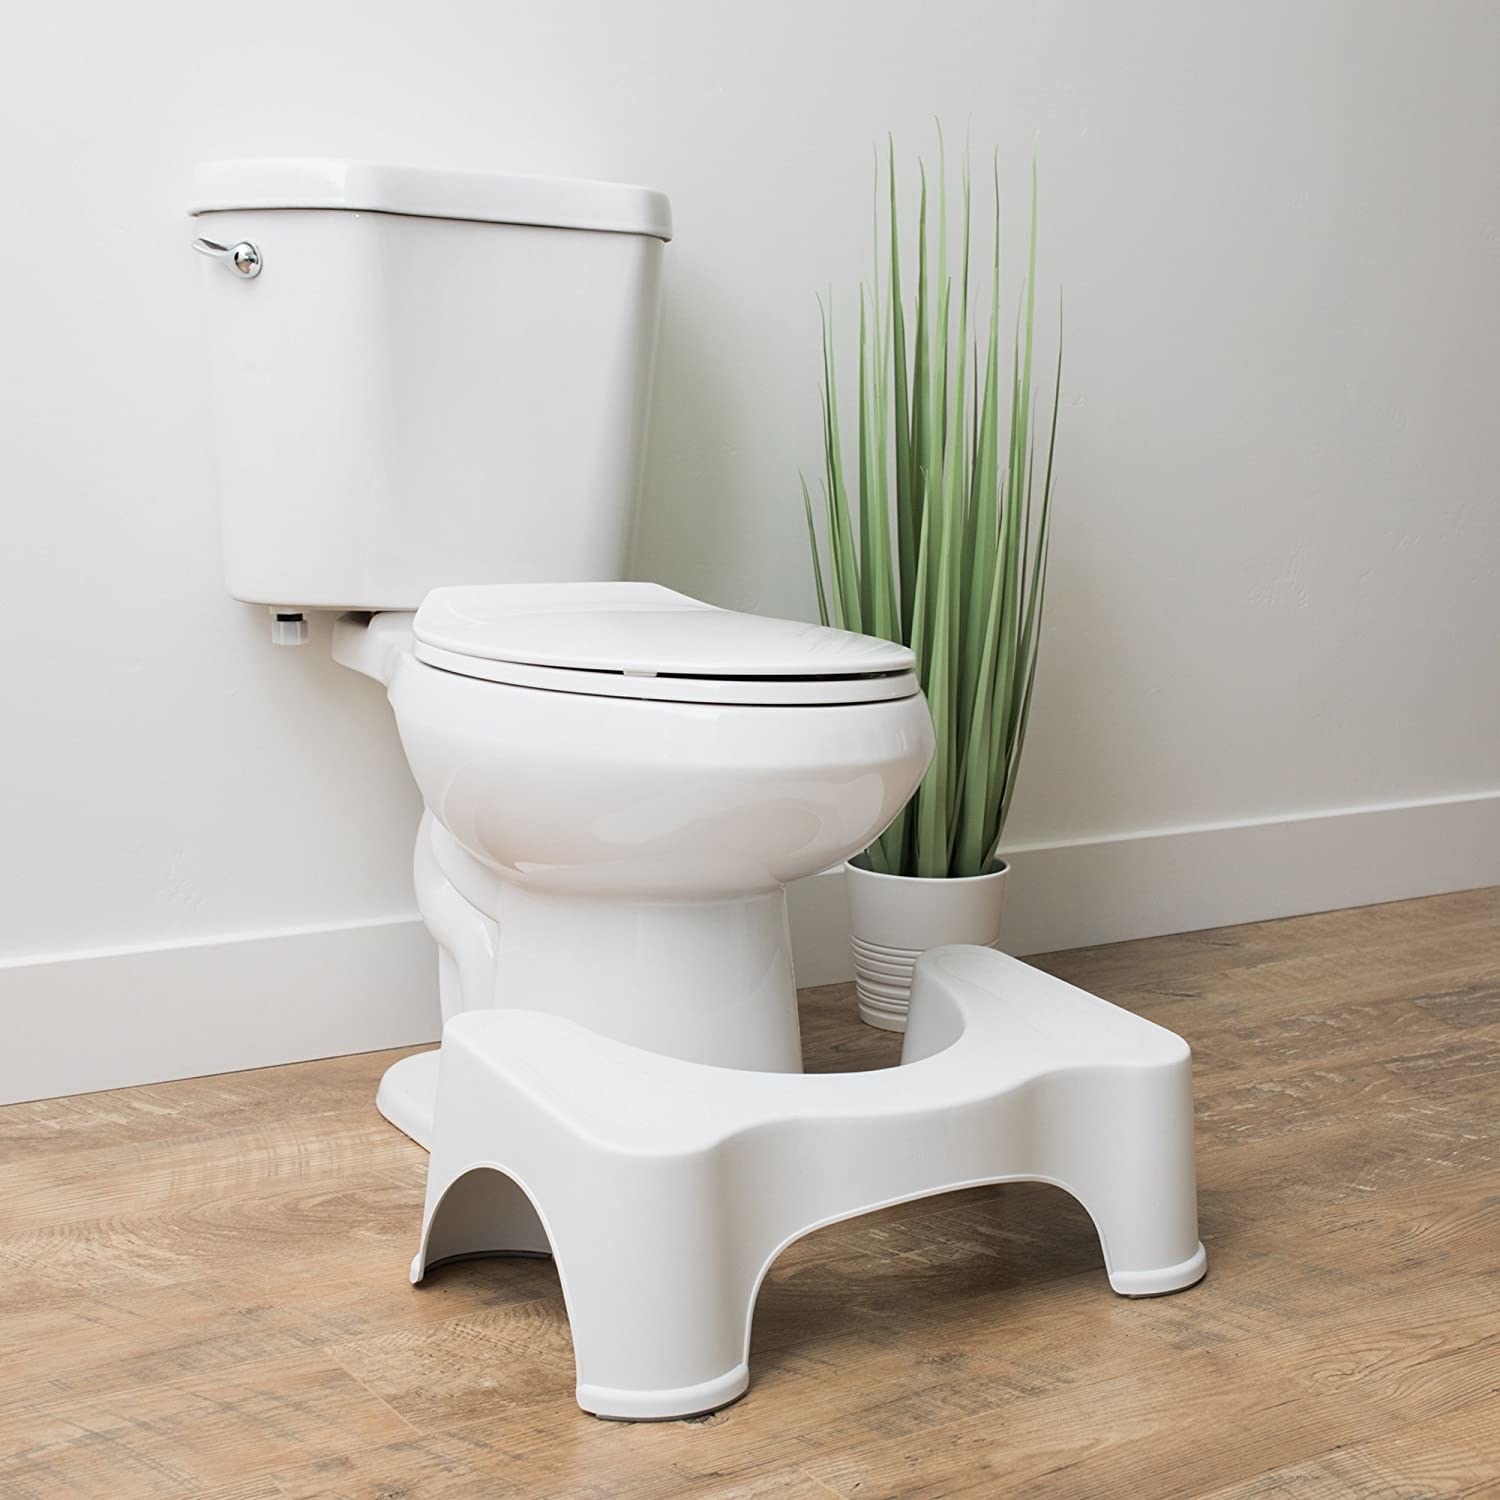 The white Squatty Potty in front of a toilet